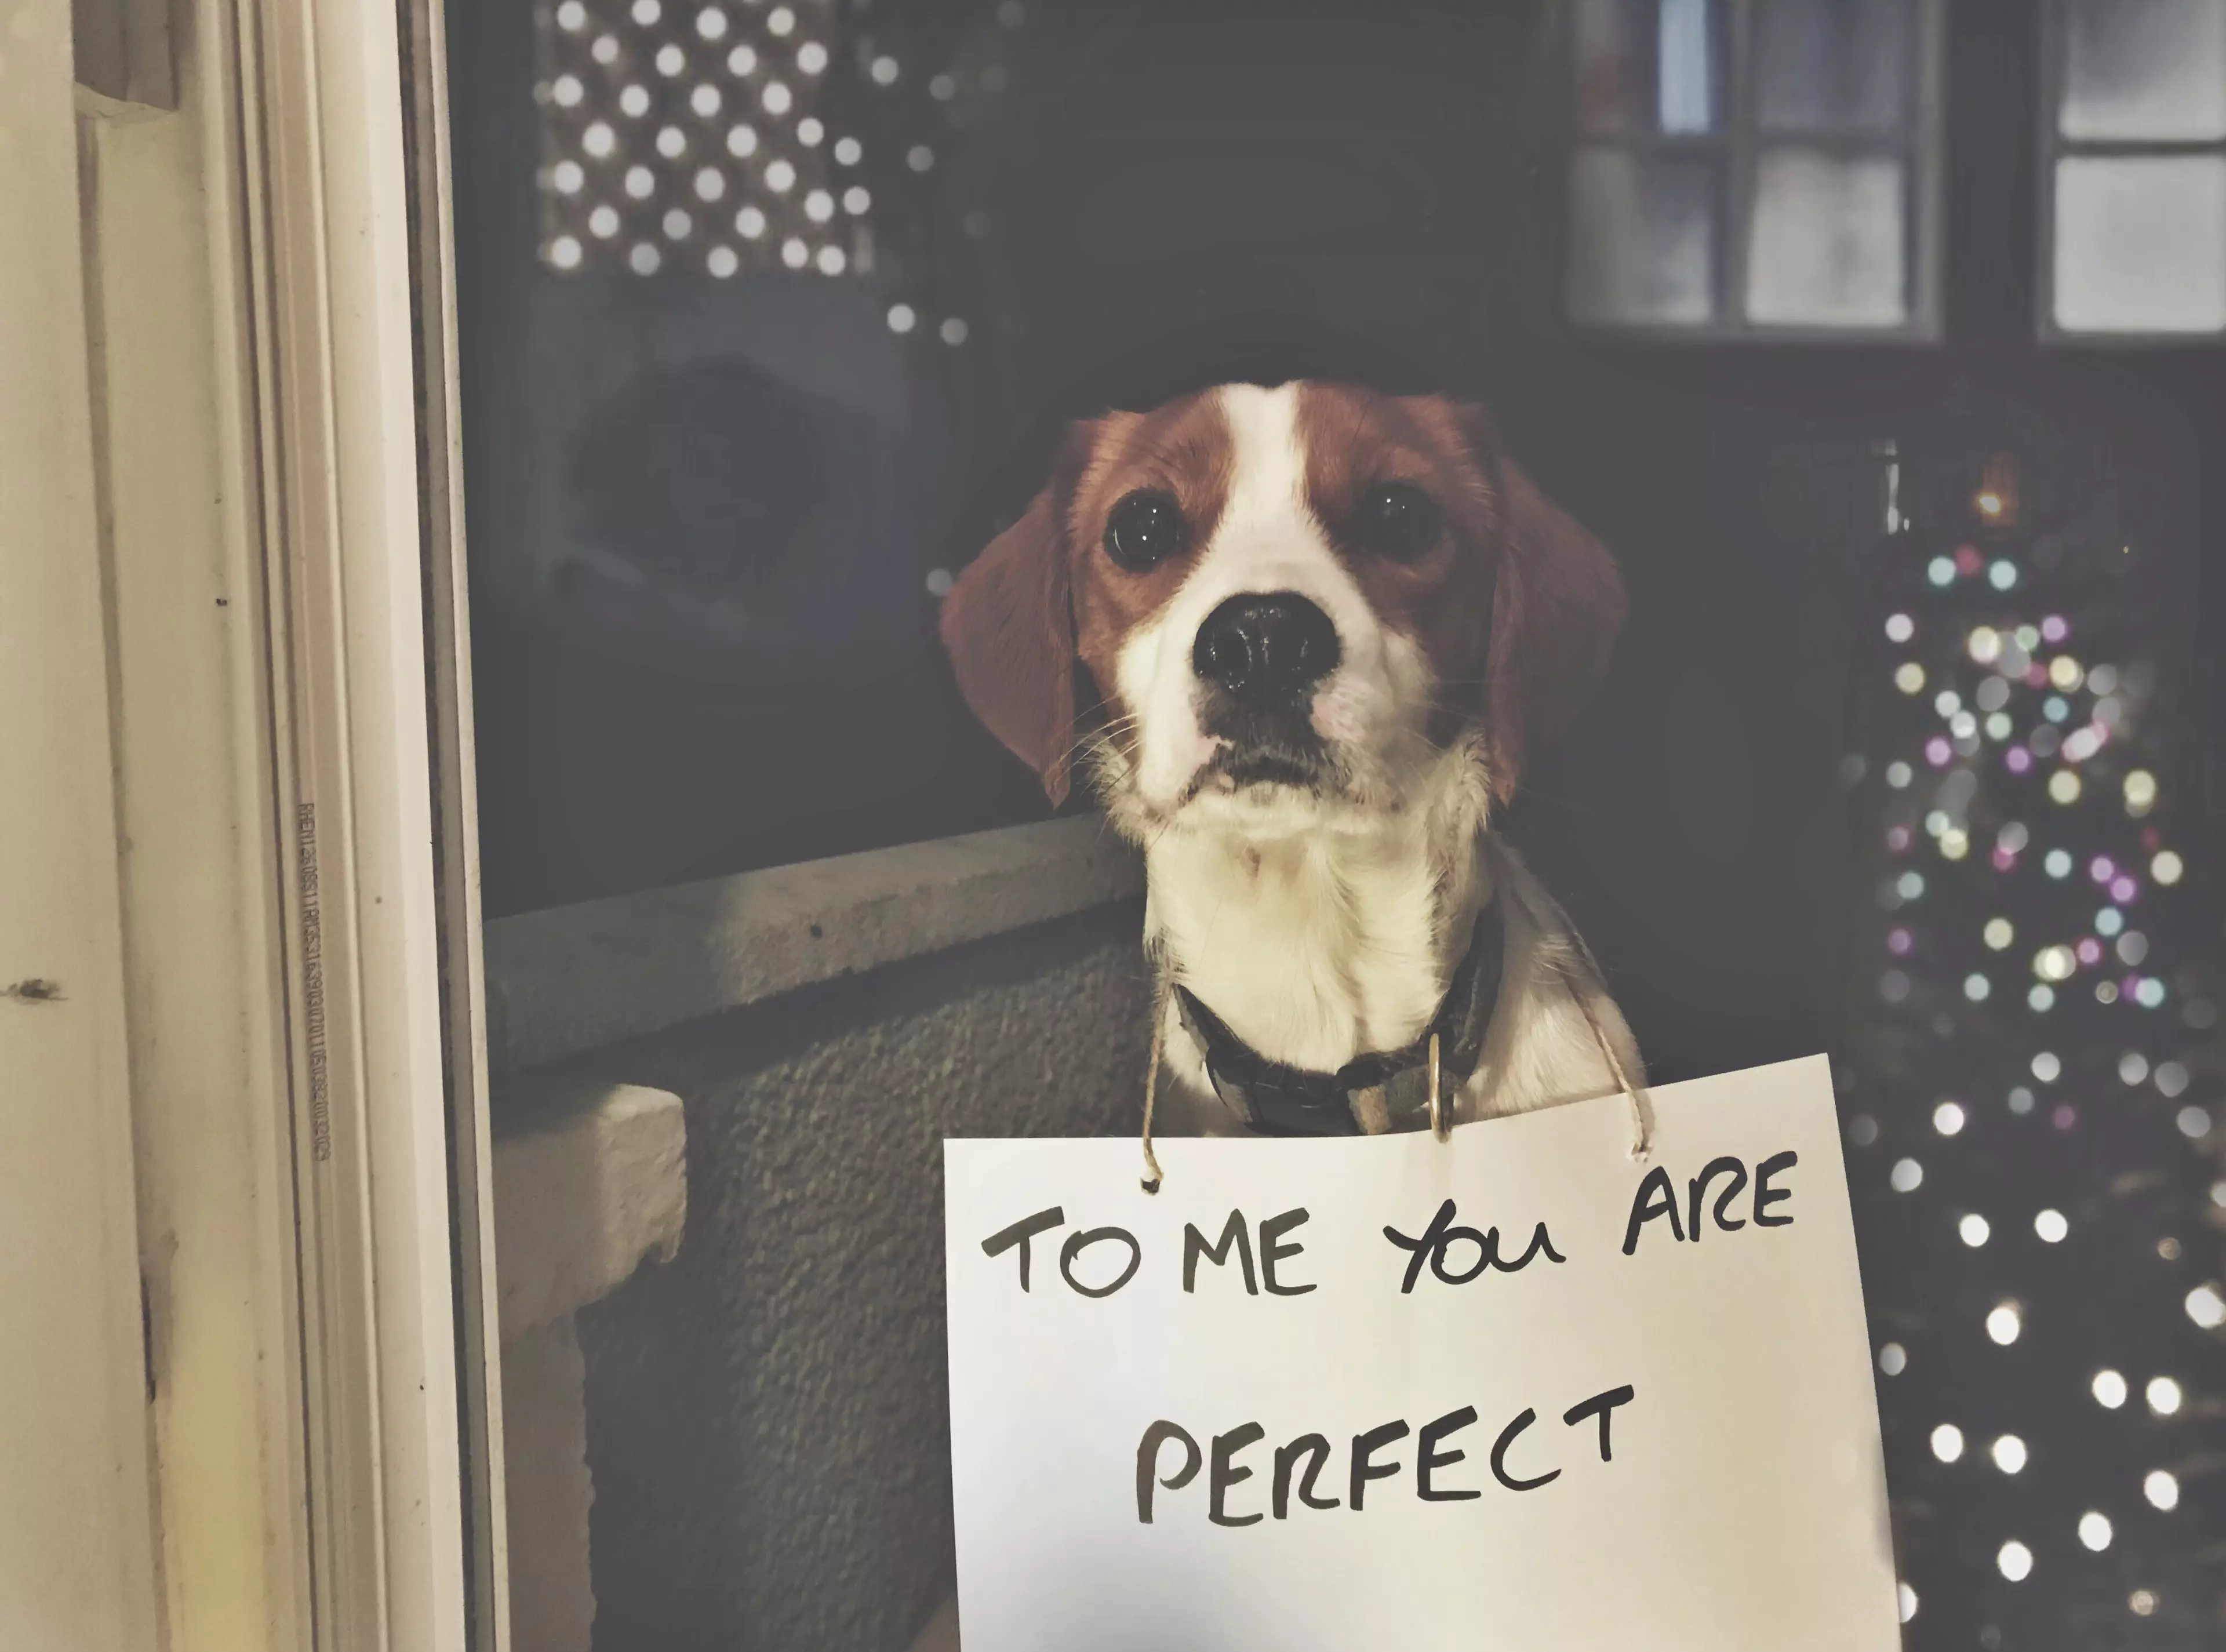 In other years, Emma has re-produced famous film scenes, such as from 'Love Actually' (